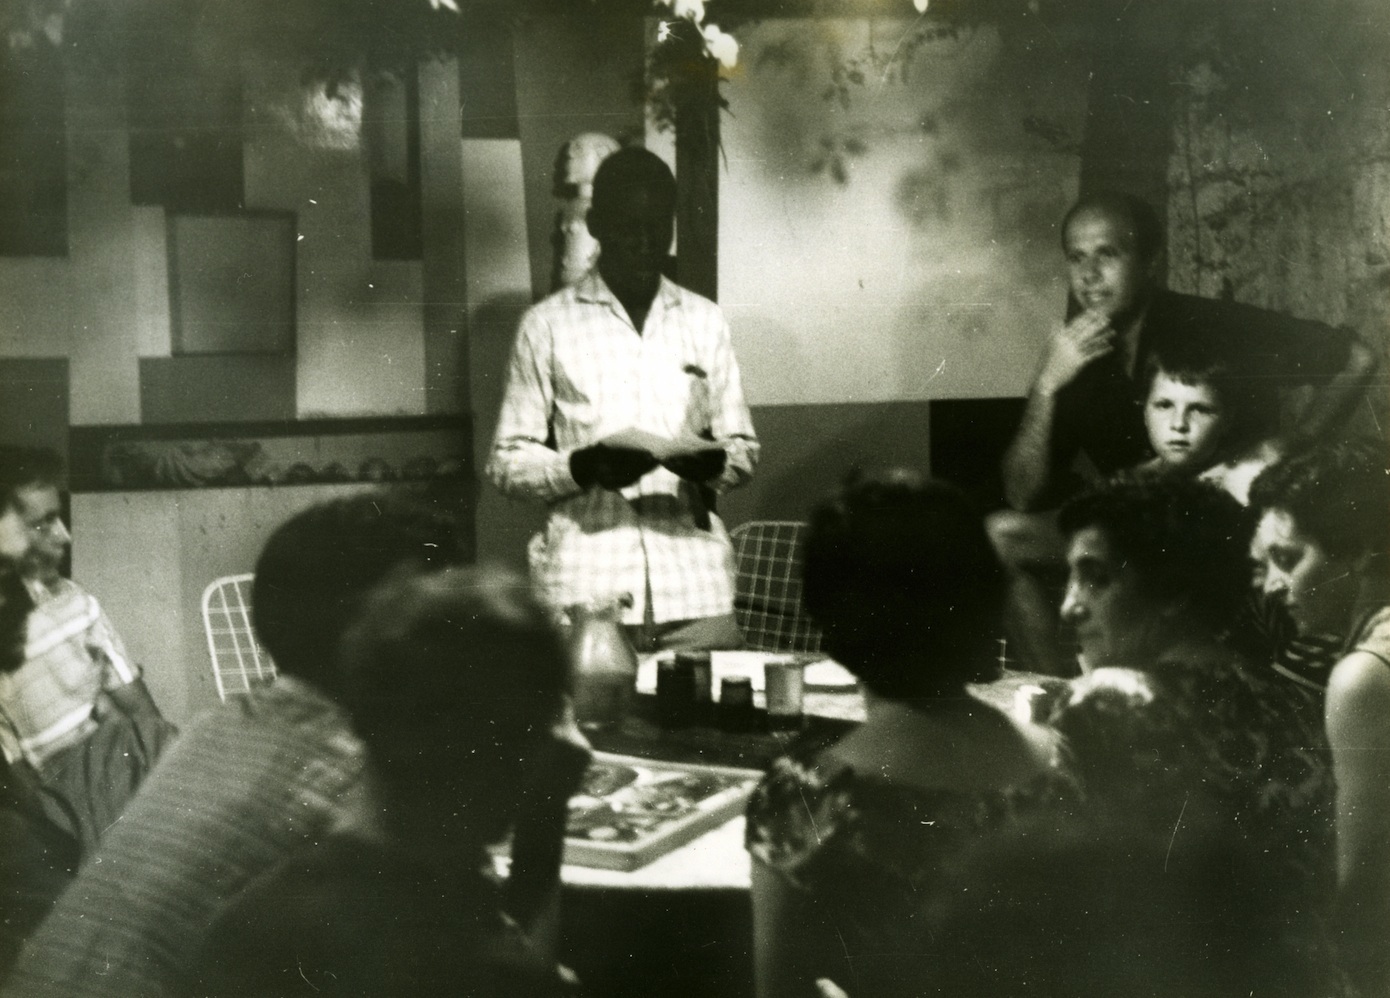 Photo of Pancho Guedes and Malangatana during the Summer School, Lourenço Marques / Maputo, January 1961. Pancho Guedes archives.